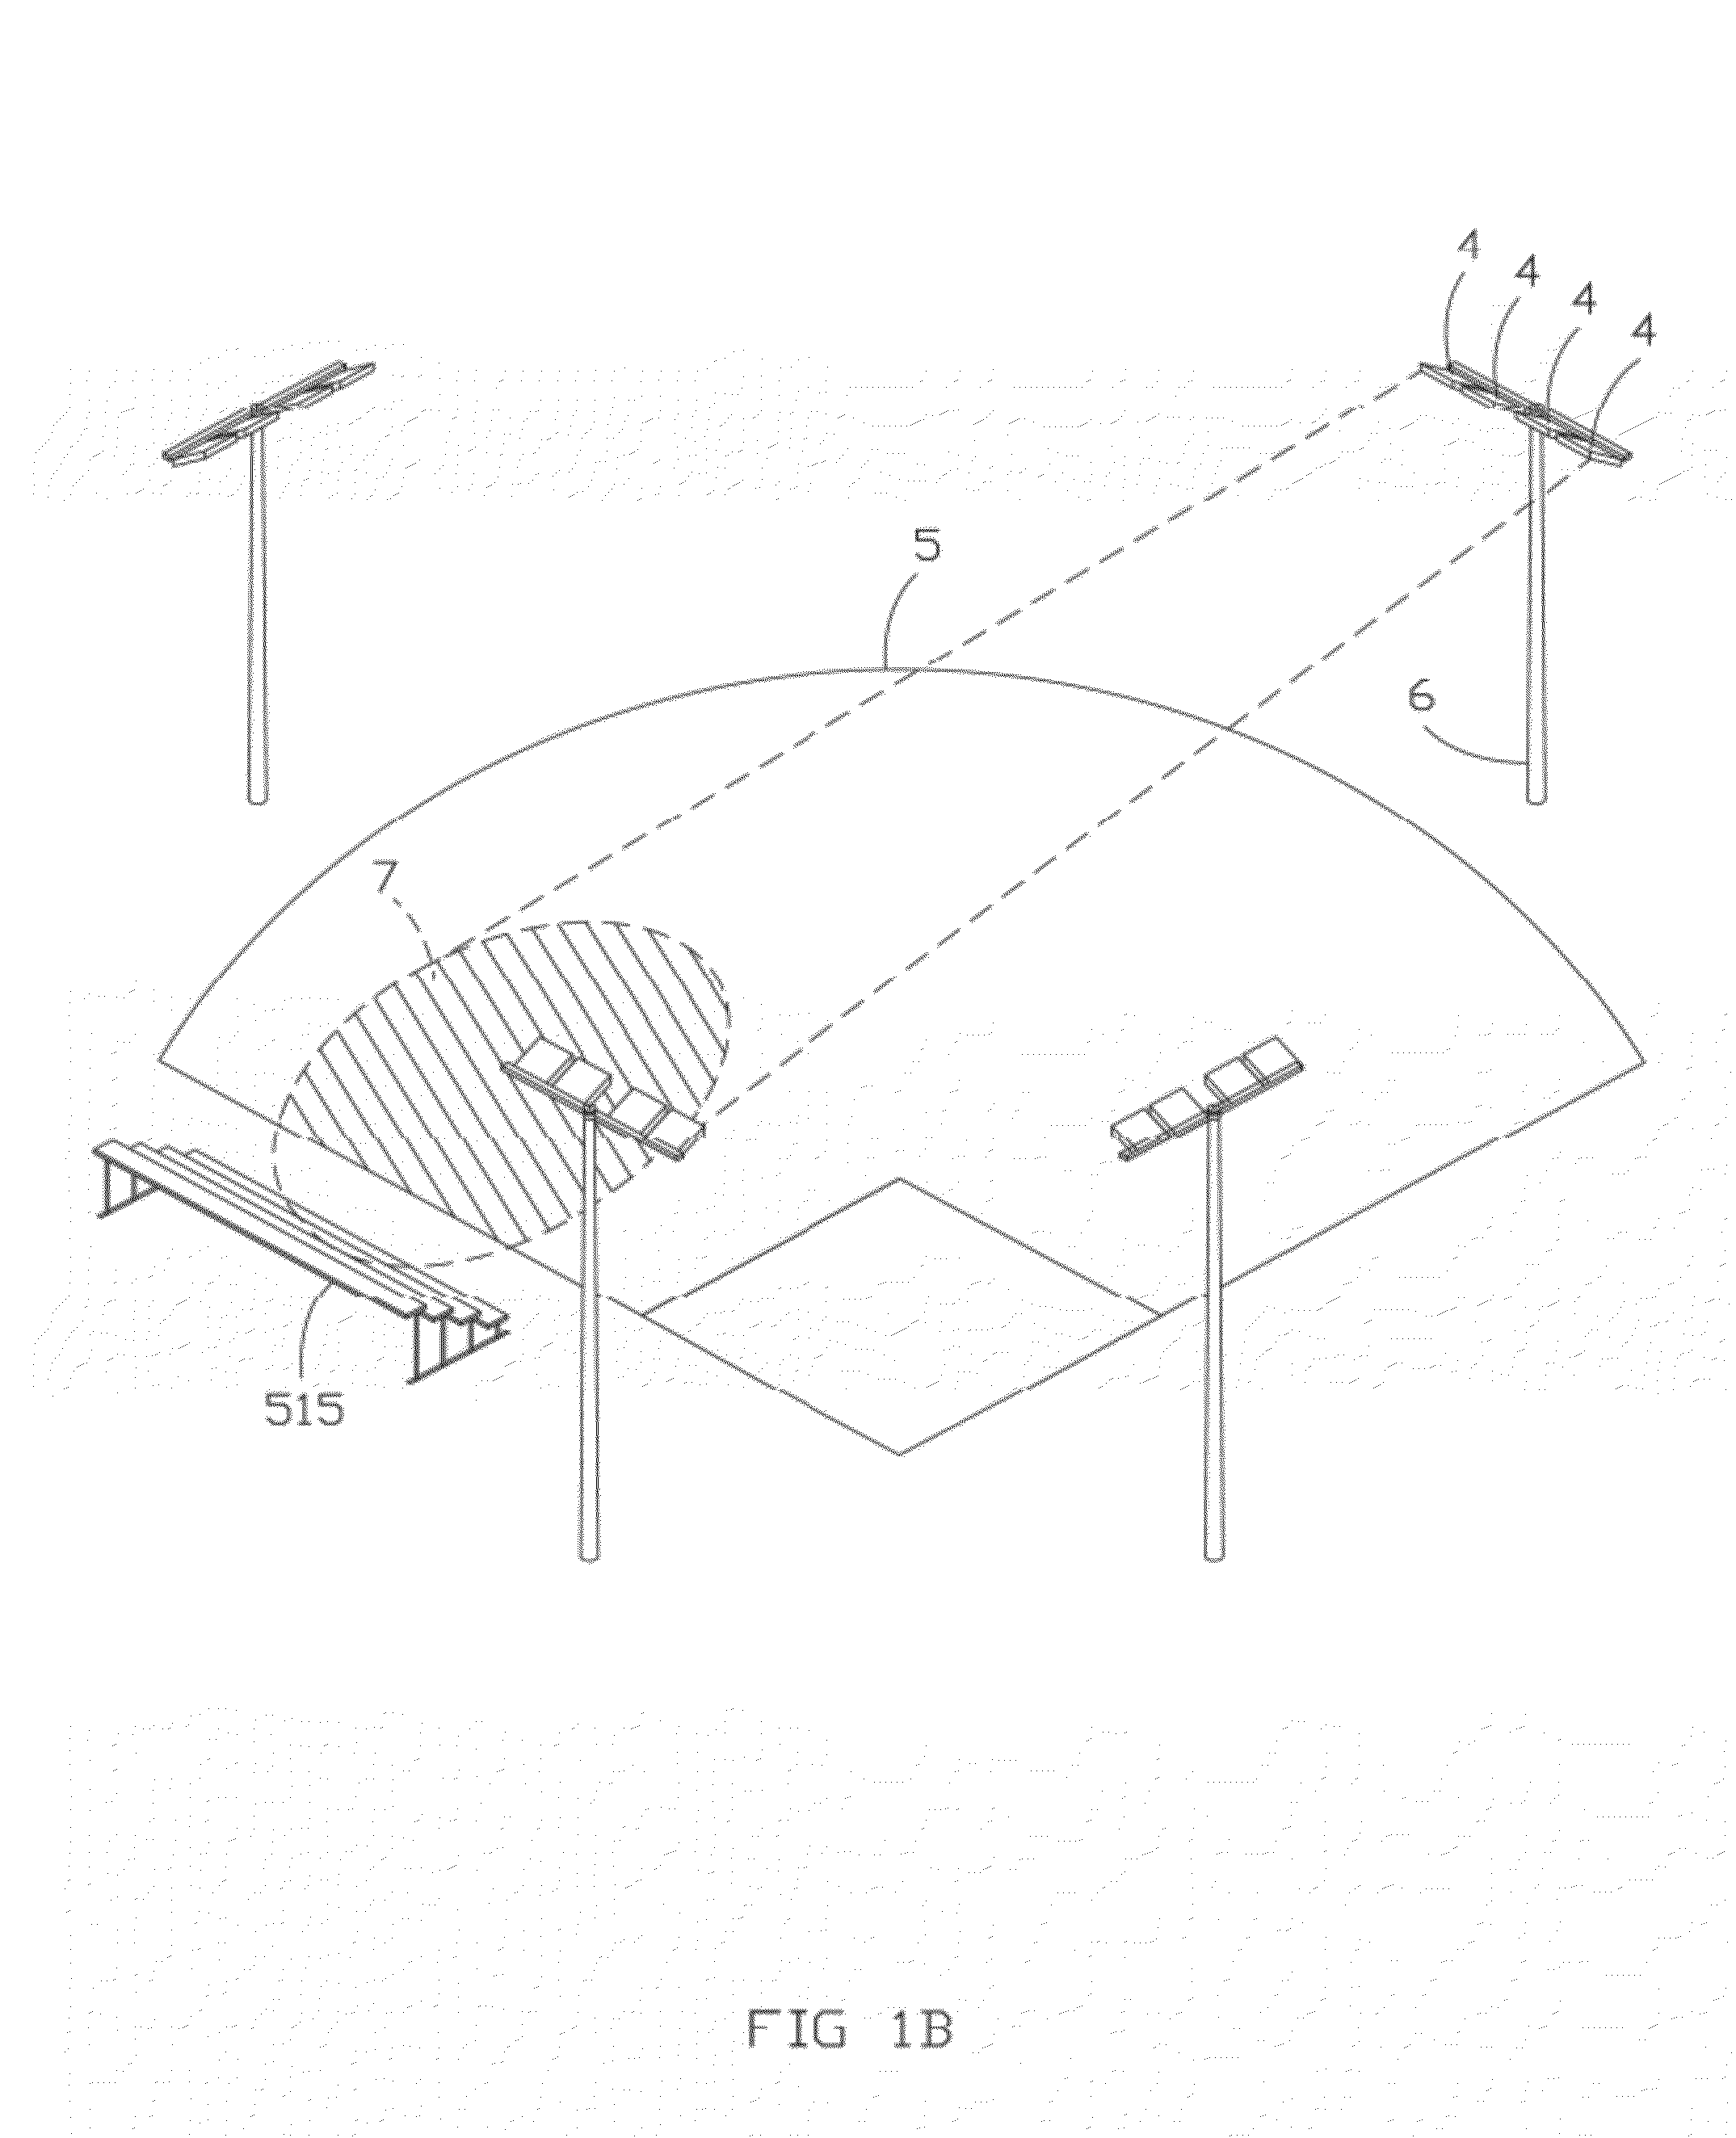 Apparatus, method, and system for independent aiming and cutoff steps in illuminating a target area